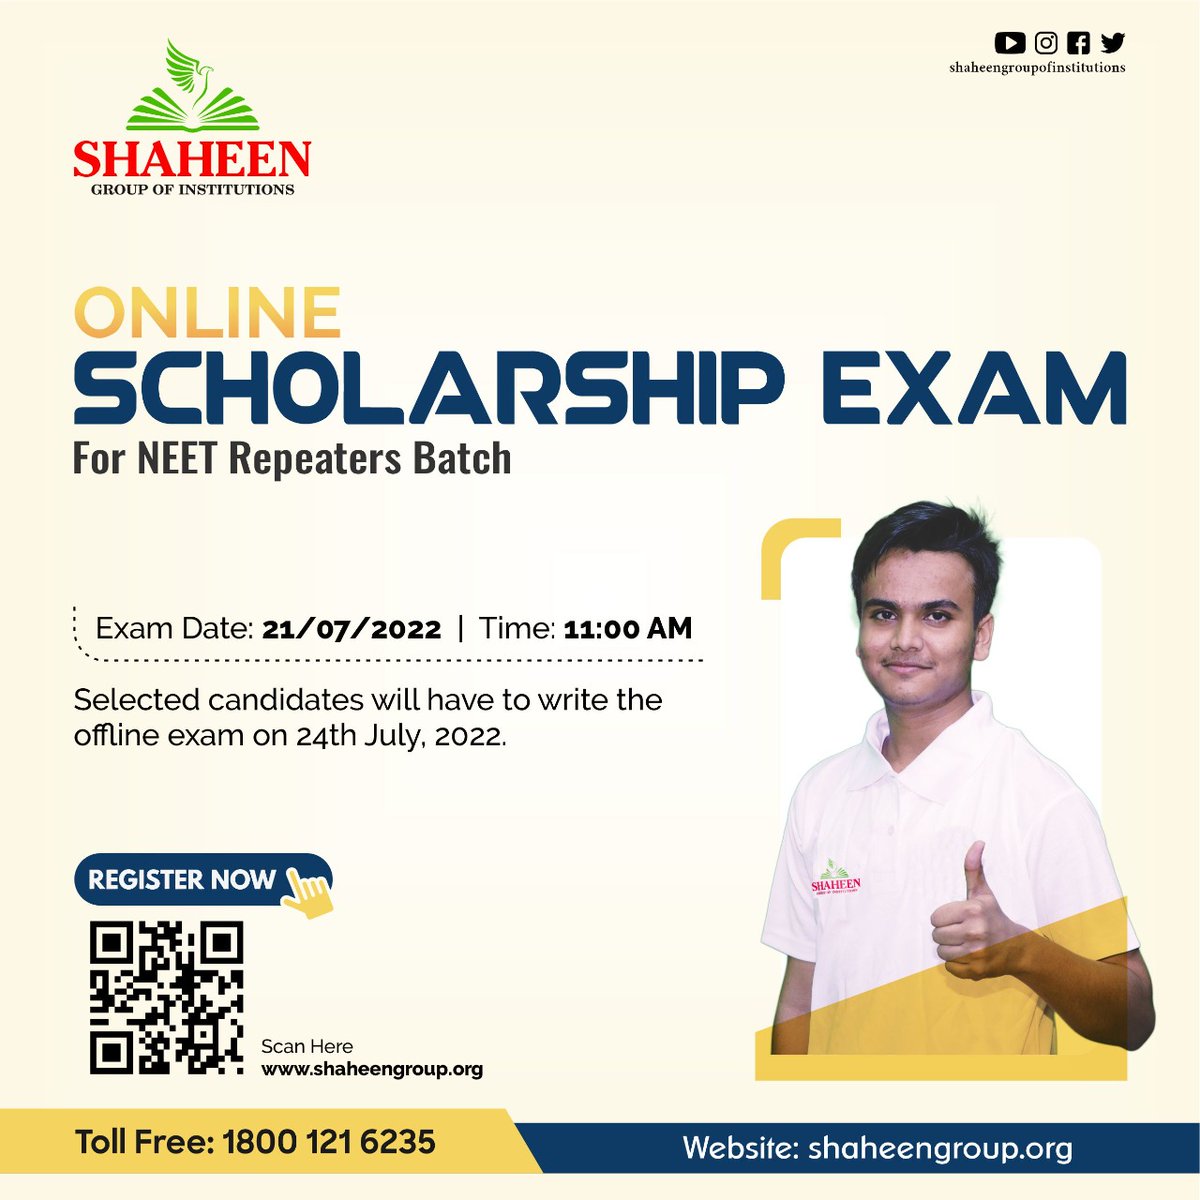 🎈🎈 Online Scholarship Exam For NEET Repeaters Batch 🎈🎈
✅ Exam Date:  21/07/2022 Time 11:00 AM
✅ Selected candidates will have to write the offline exam on 24th July,  2022.
✅  Register Now : shaheen.atcampussolutions.com/.../online...
#ShaheenBidar #CrackNEET #NEET2022 #OnlineScholarship